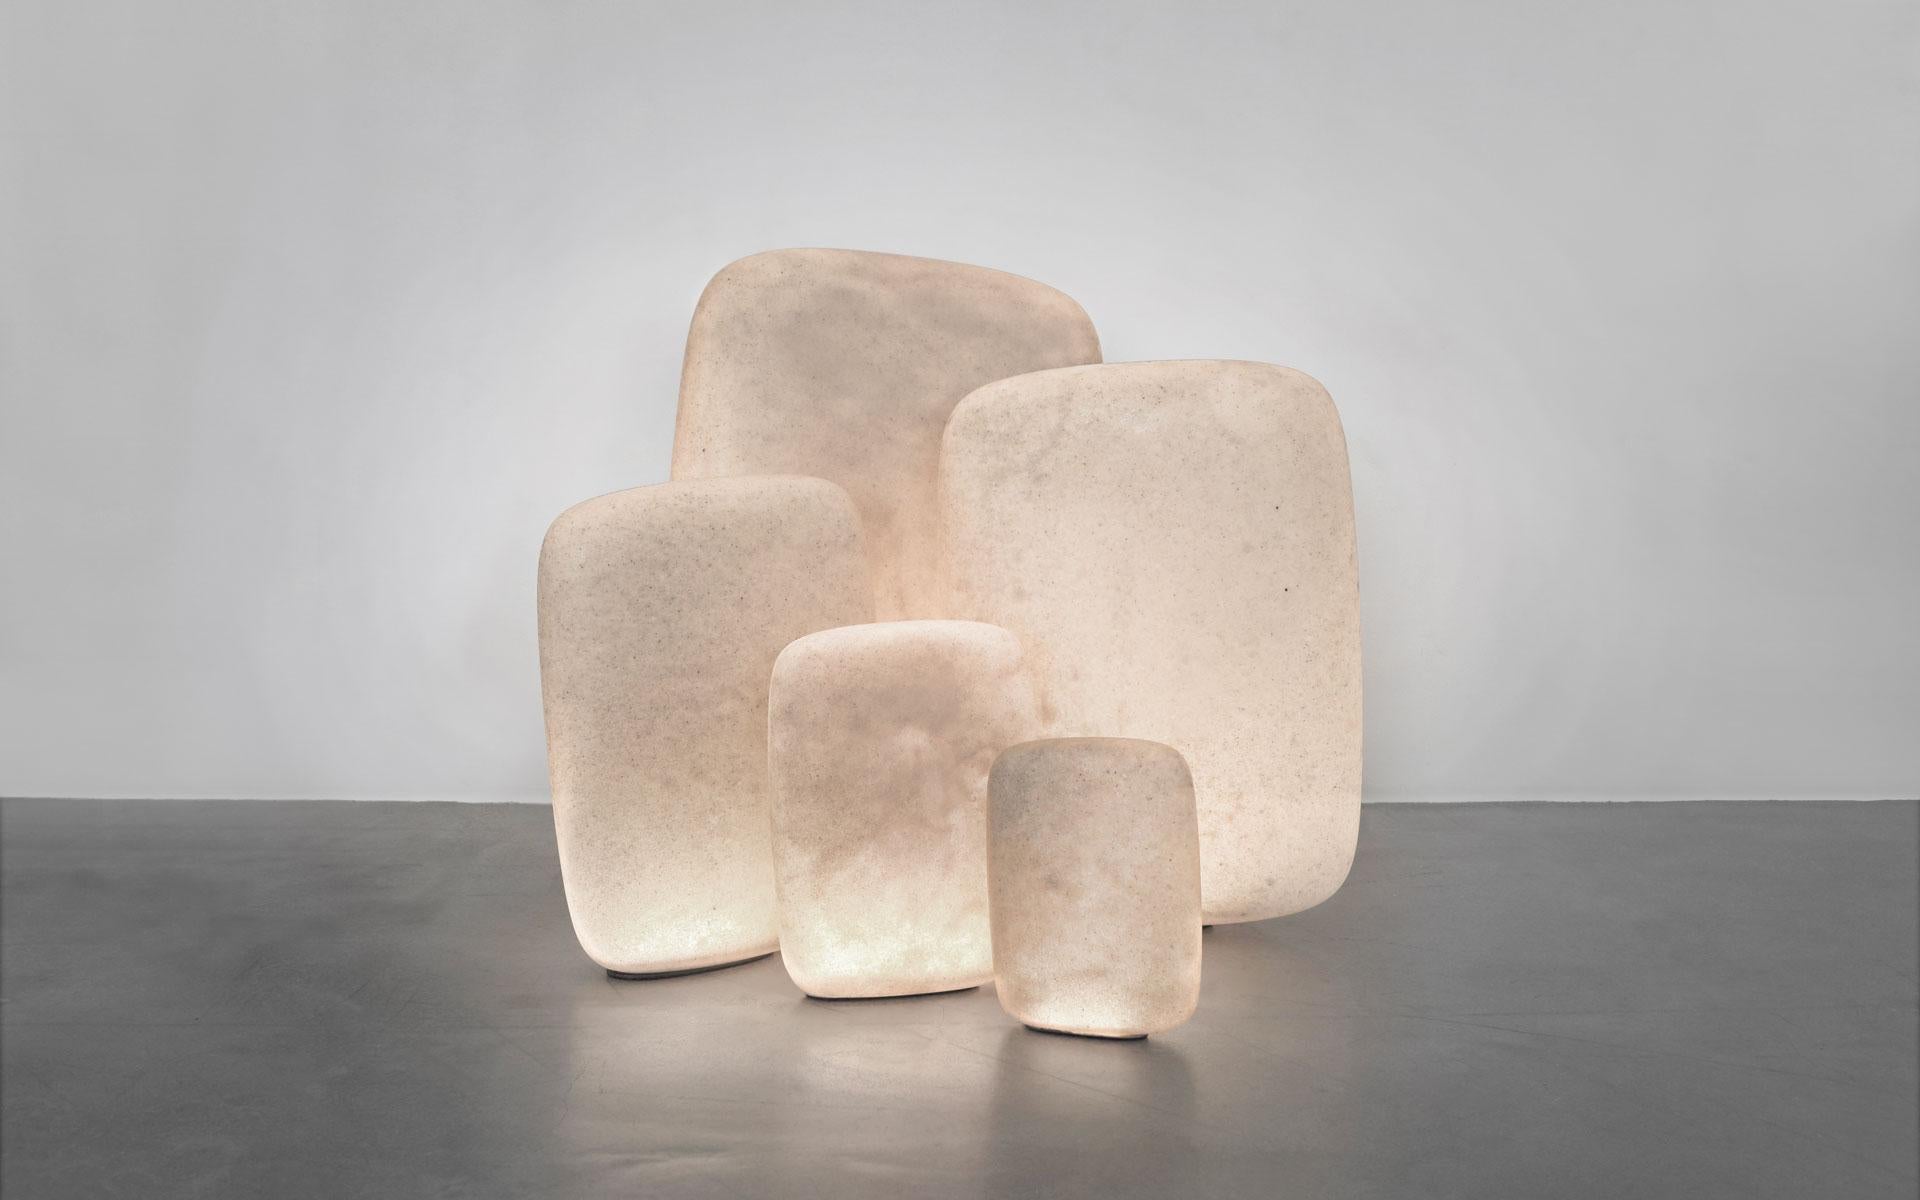 Galet is a set of 5 lamps composing a light sculpture. Organic shapes that found their balance point, these light rocks are meticulously designed.

The Galet lamps are crafted with a unique roto-molding combined with layering technique developed